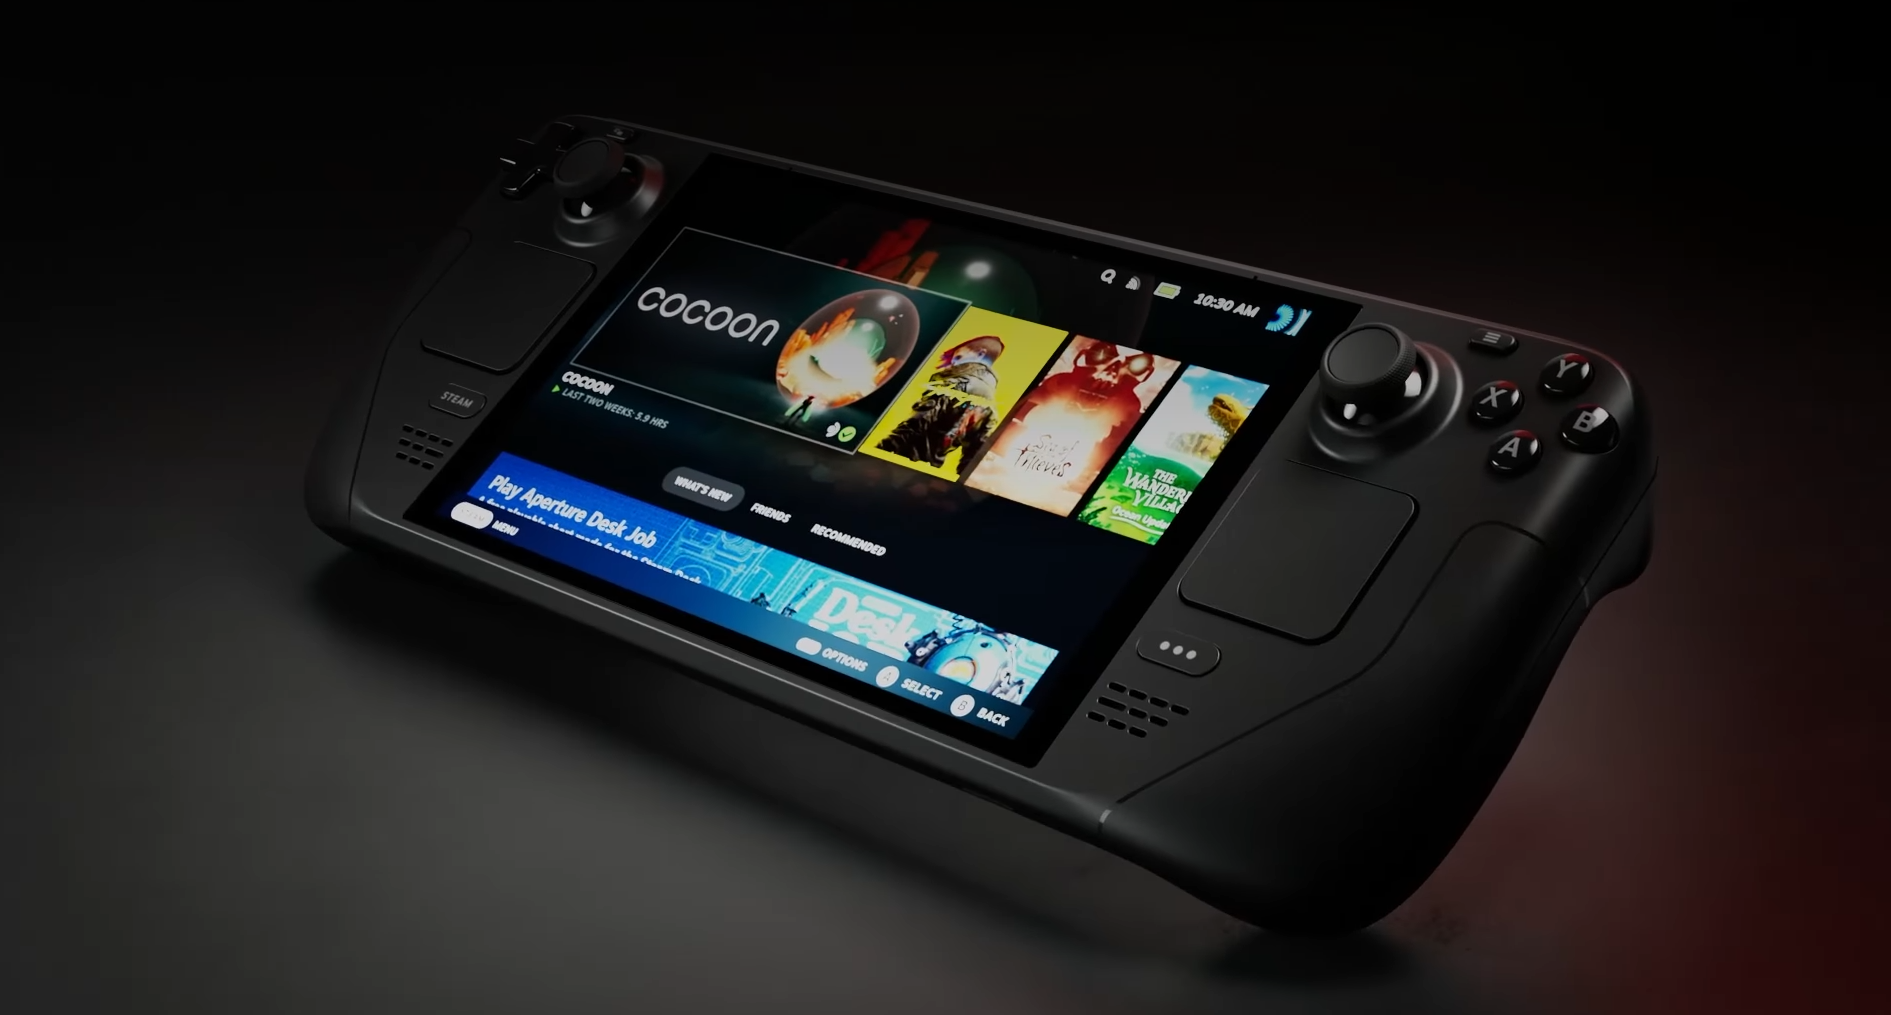 New Steam Deck With OLED Screen, More Storage Coming From Valve